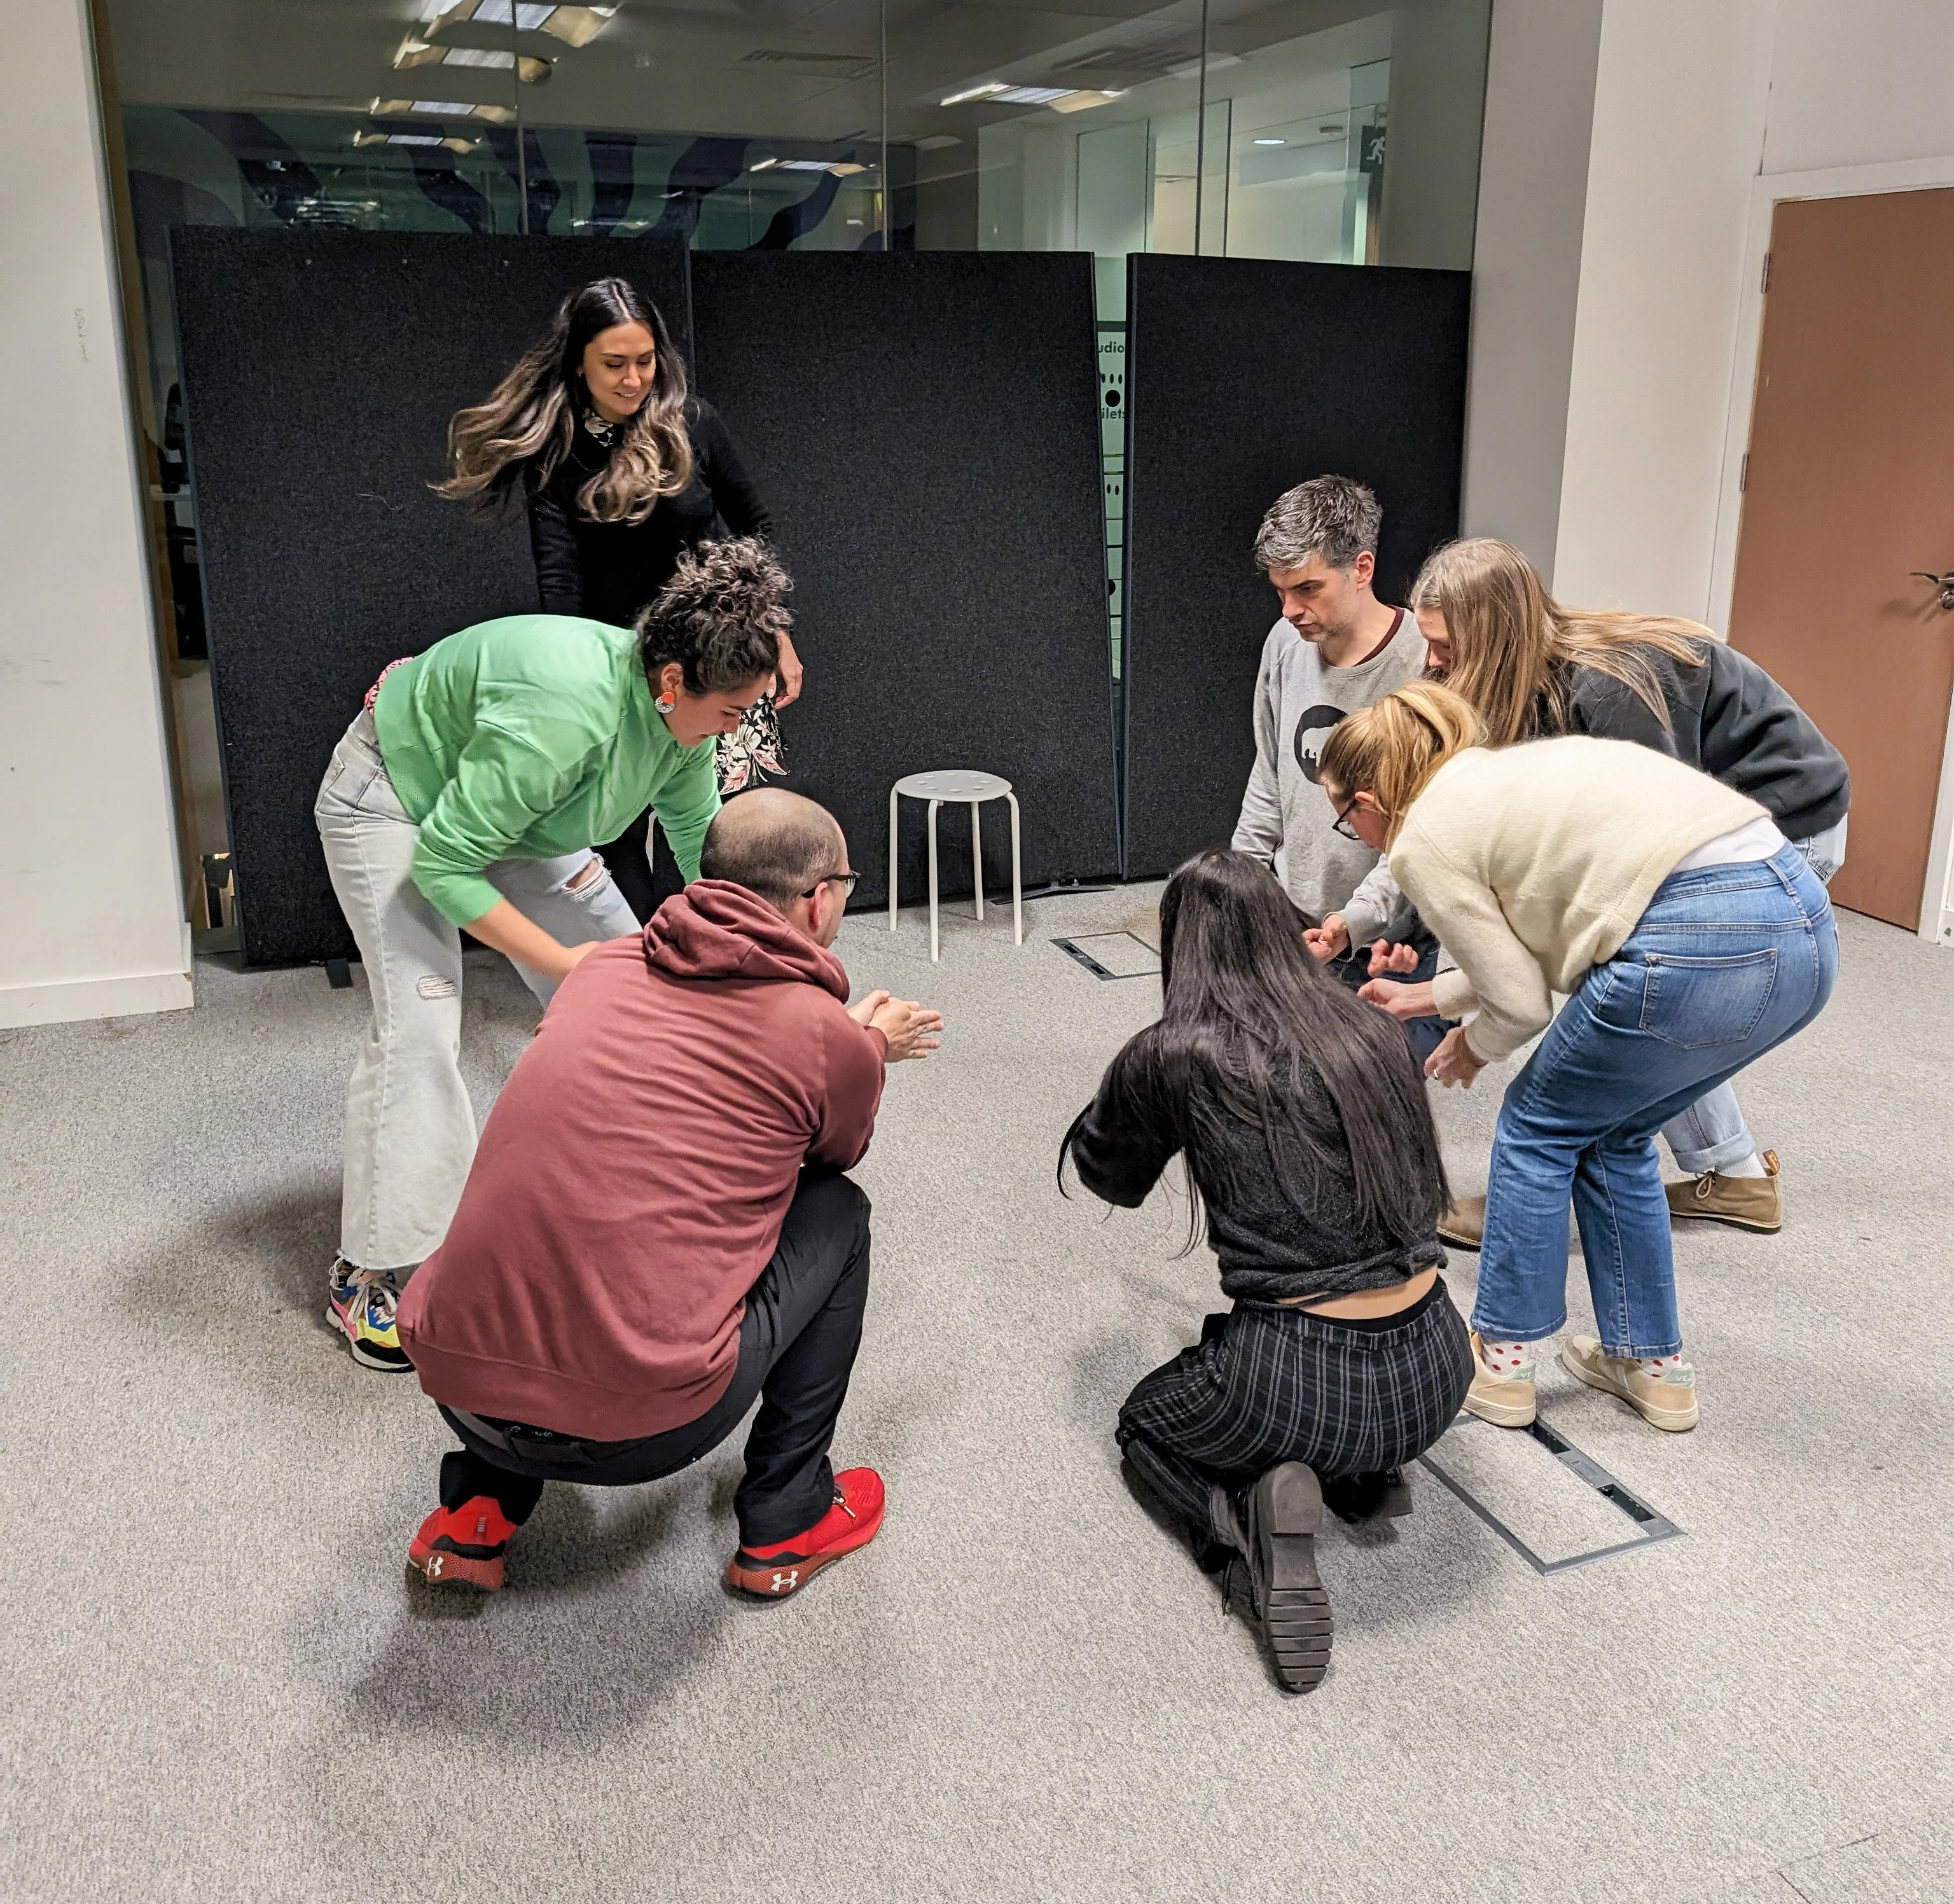 Image of people crouched down on the floor playing 